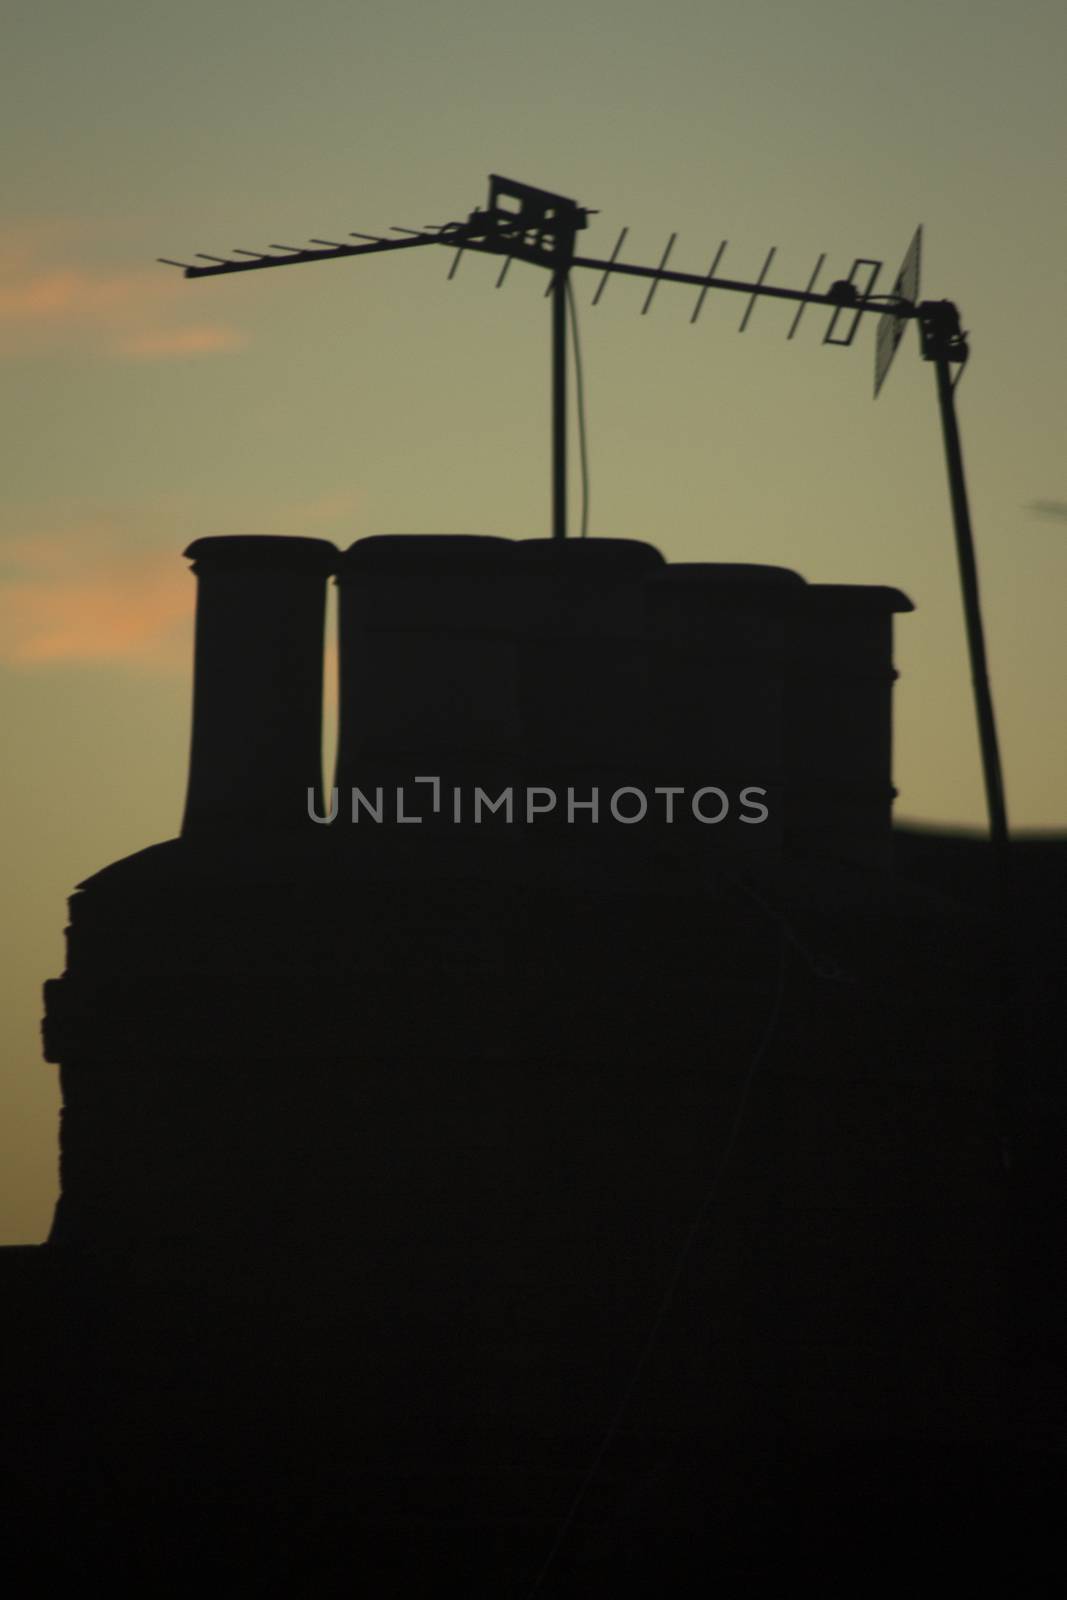 TV arial antenna chimney roof building sunset by edwardolive